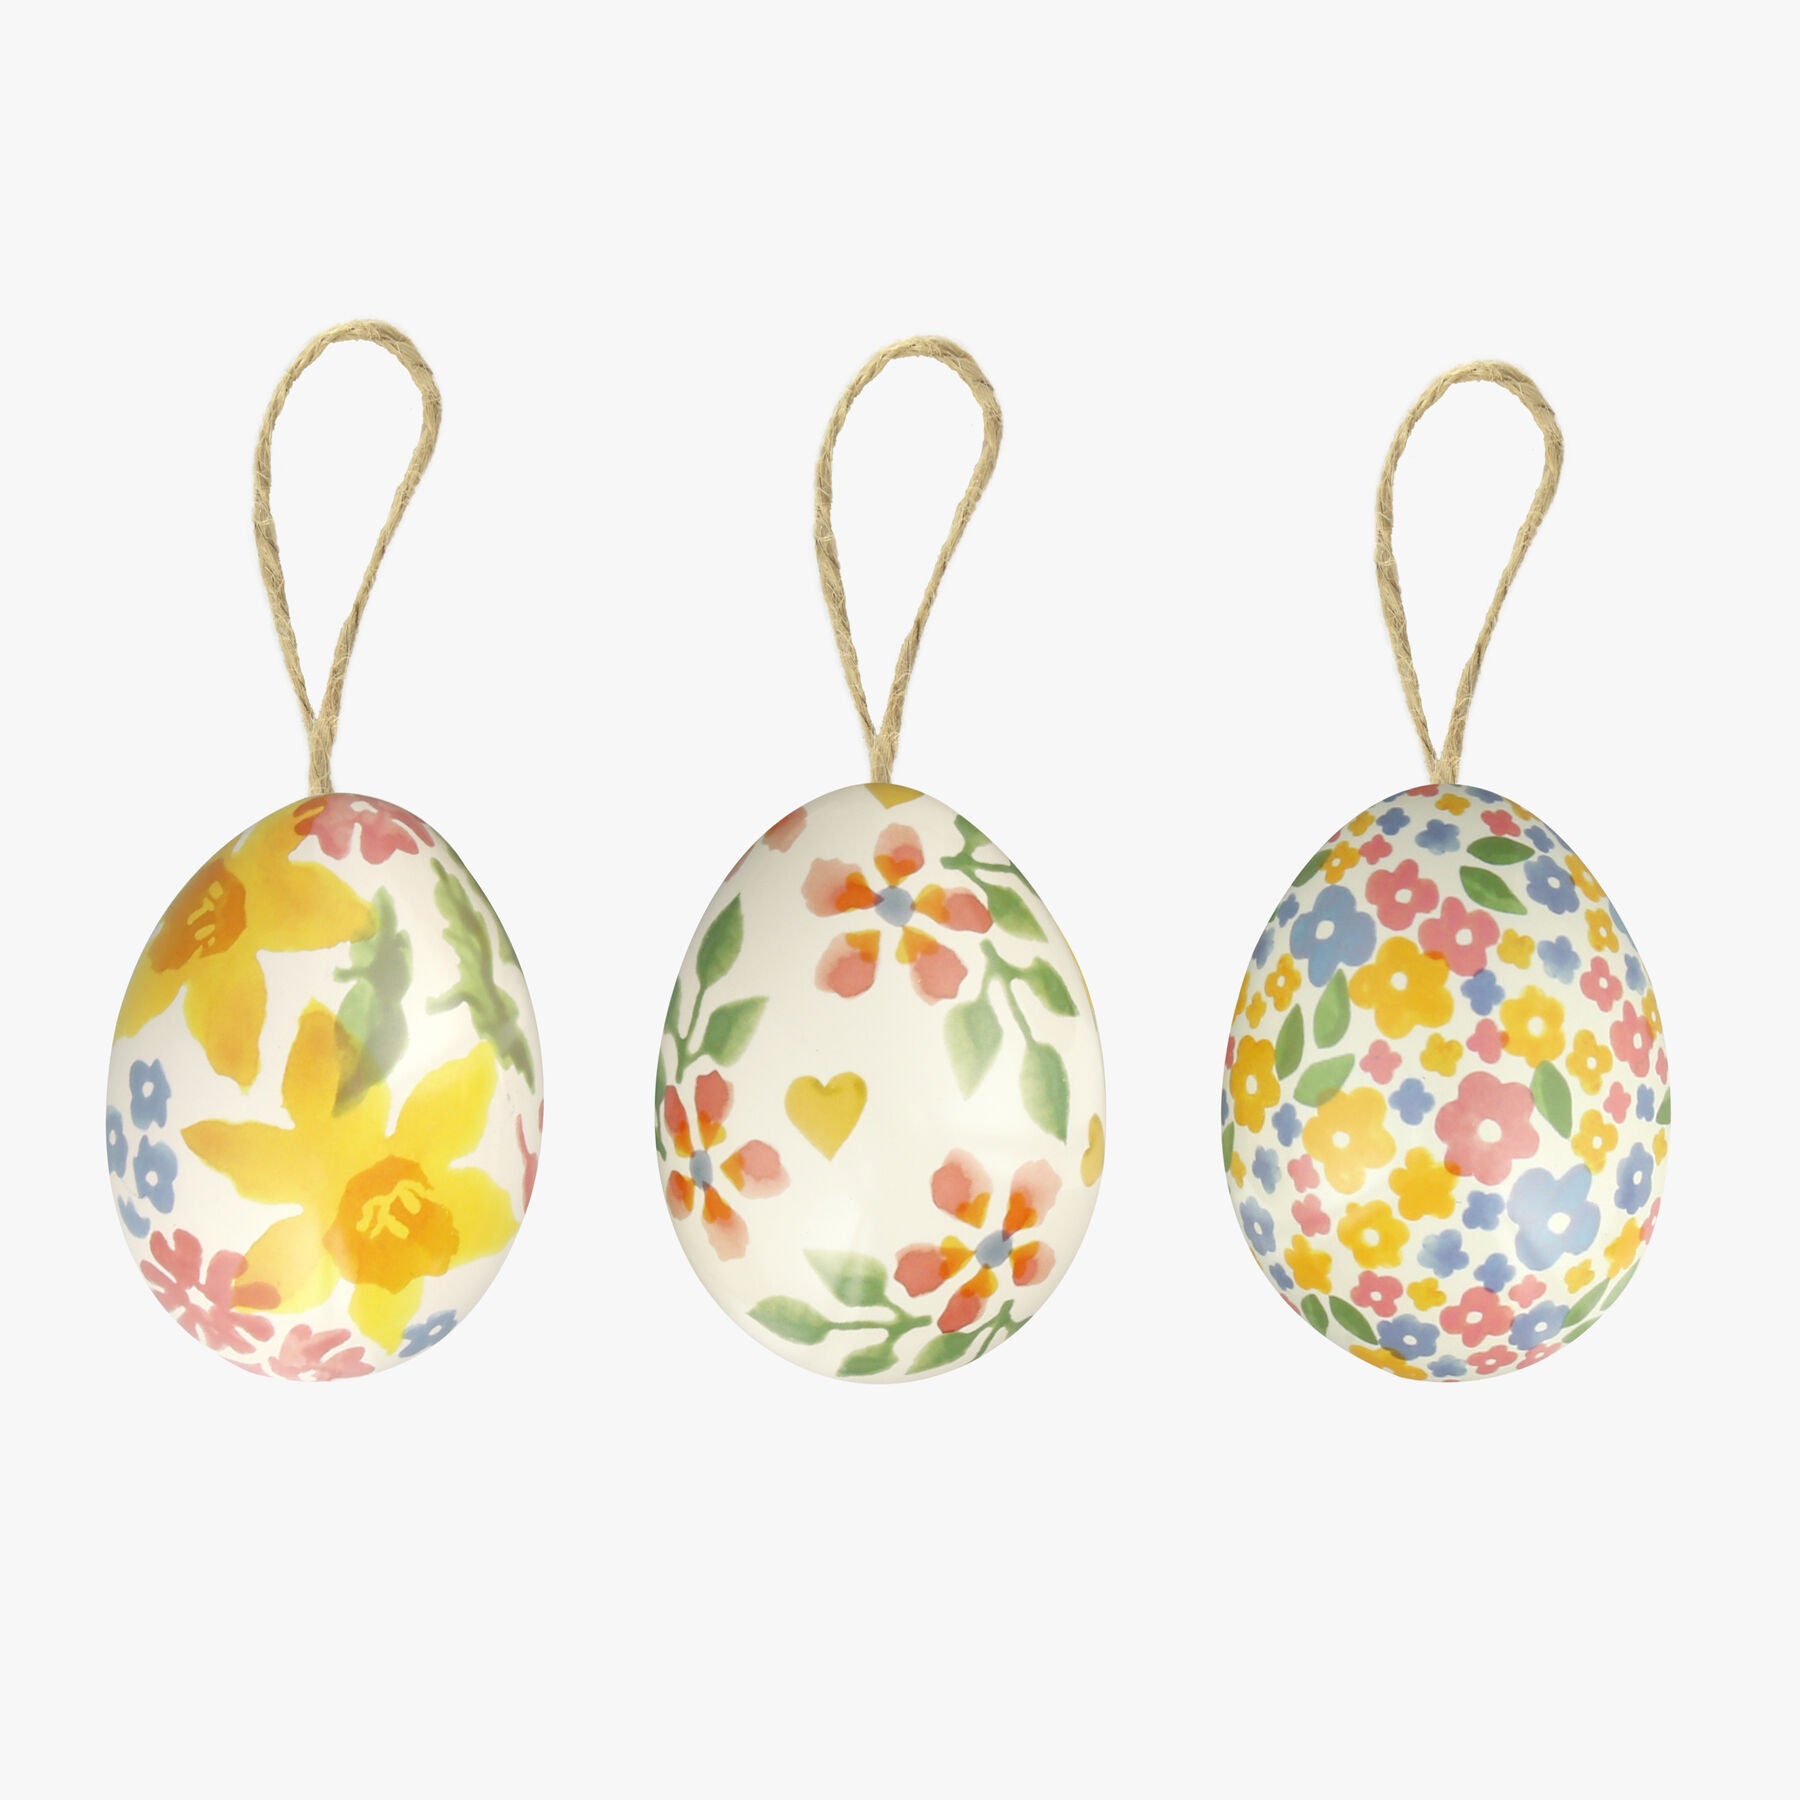 Emma Bridgewater  Wild Daffodils Set Of 3 Small Tin Egg Decorations Perfect For Decorating The Chris